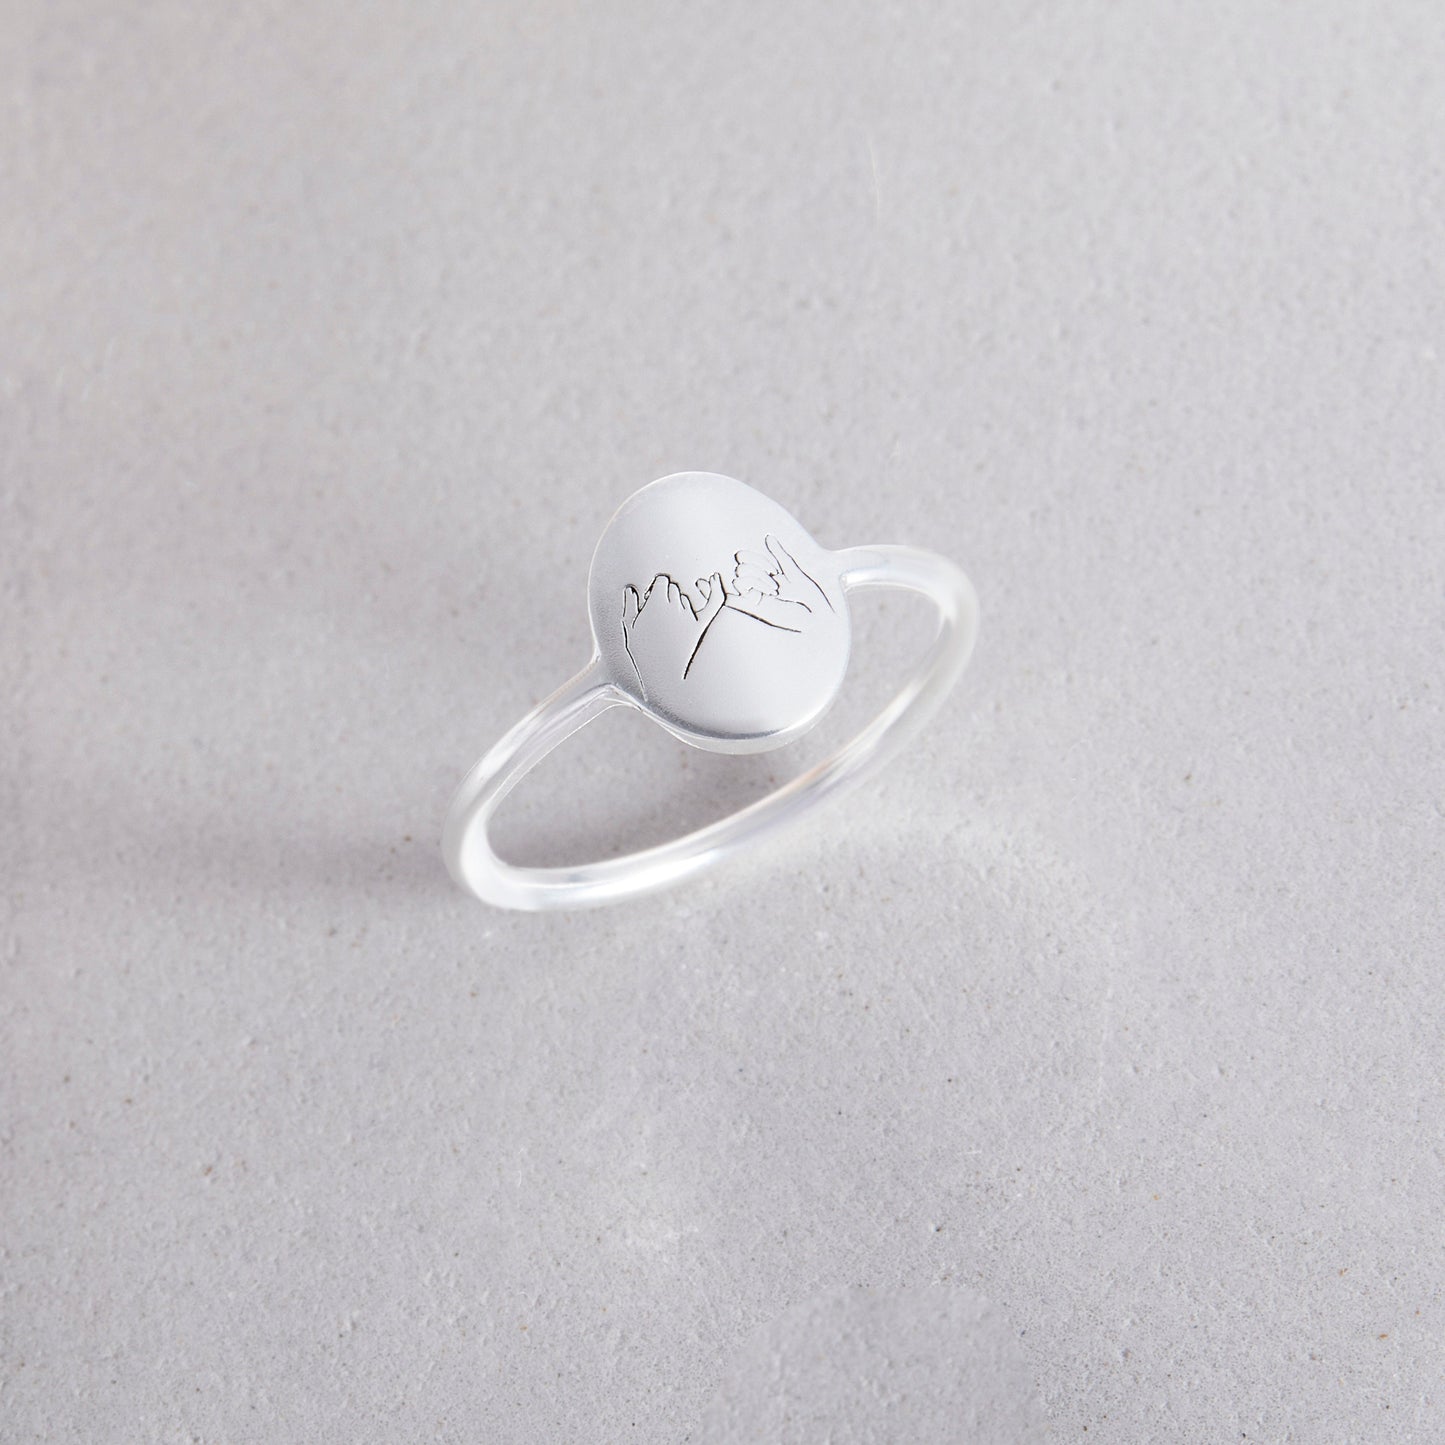 Personalized Pinky Promise Ring | Custom Dainty Ring | Everyday Statement Ring | Stacking Ring | Minimalist Stacking Ring | Engraved Ring